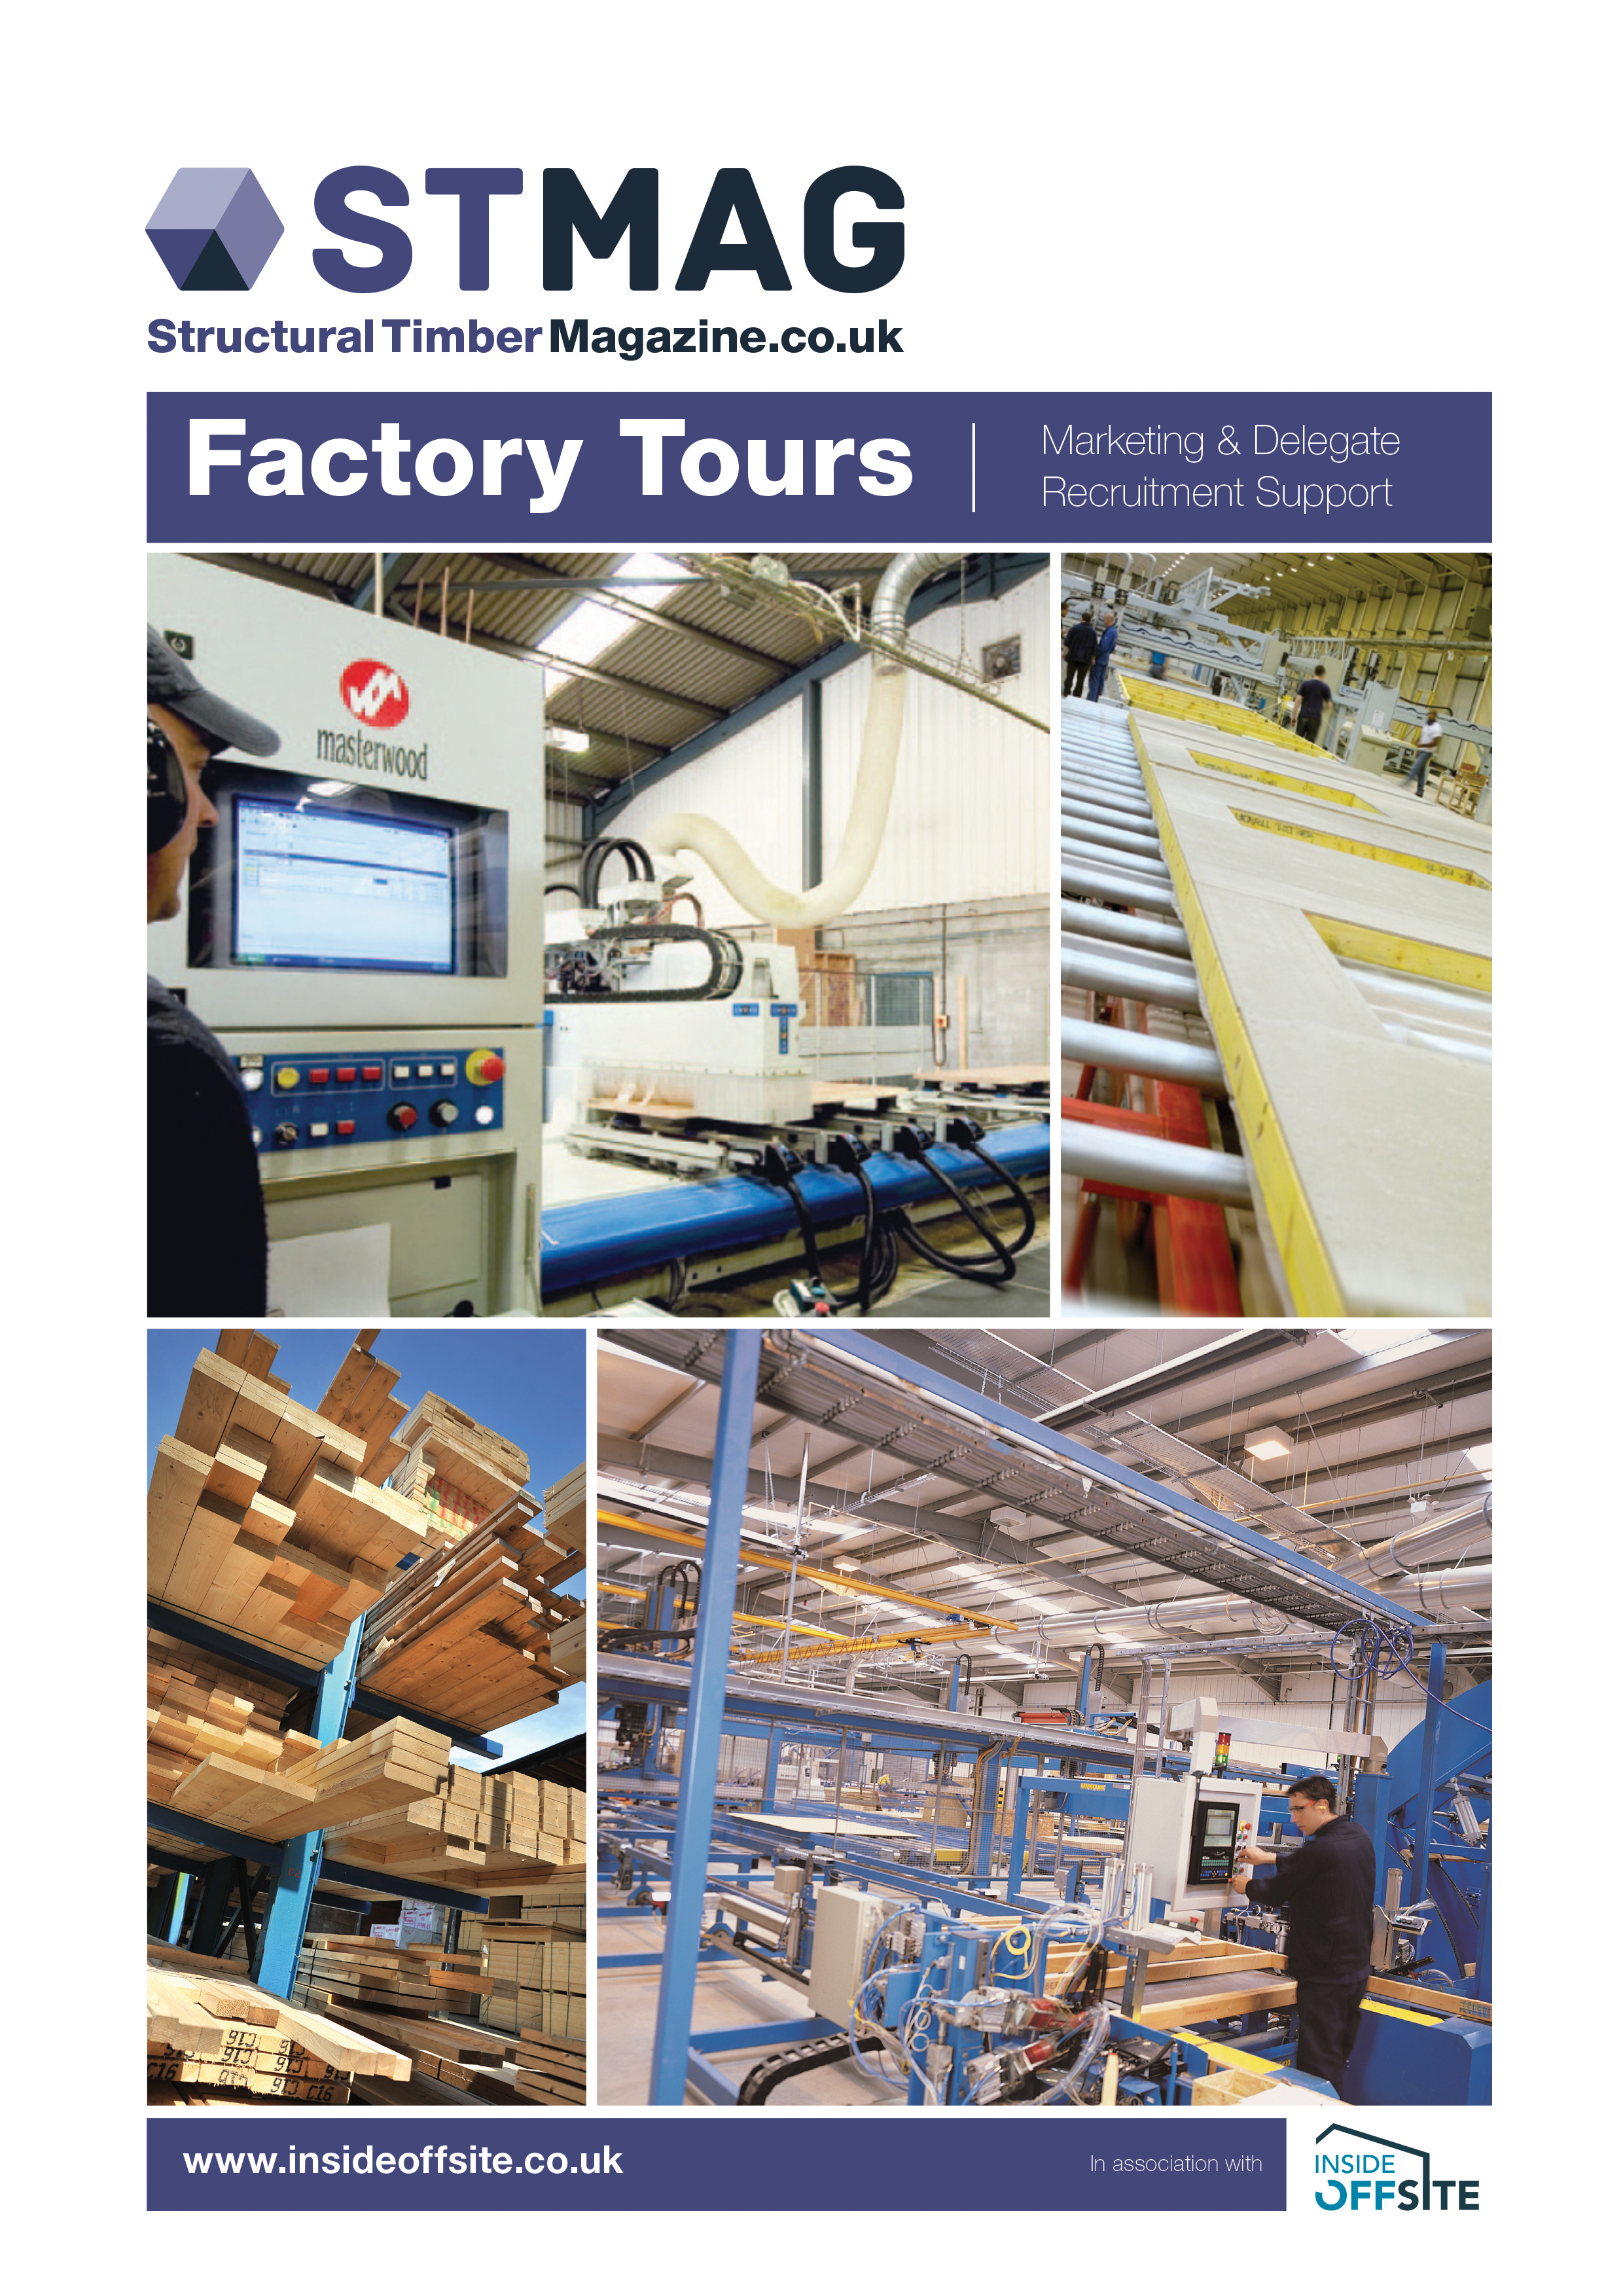 ST_Mag_4pp_Factory_Tours_Cover